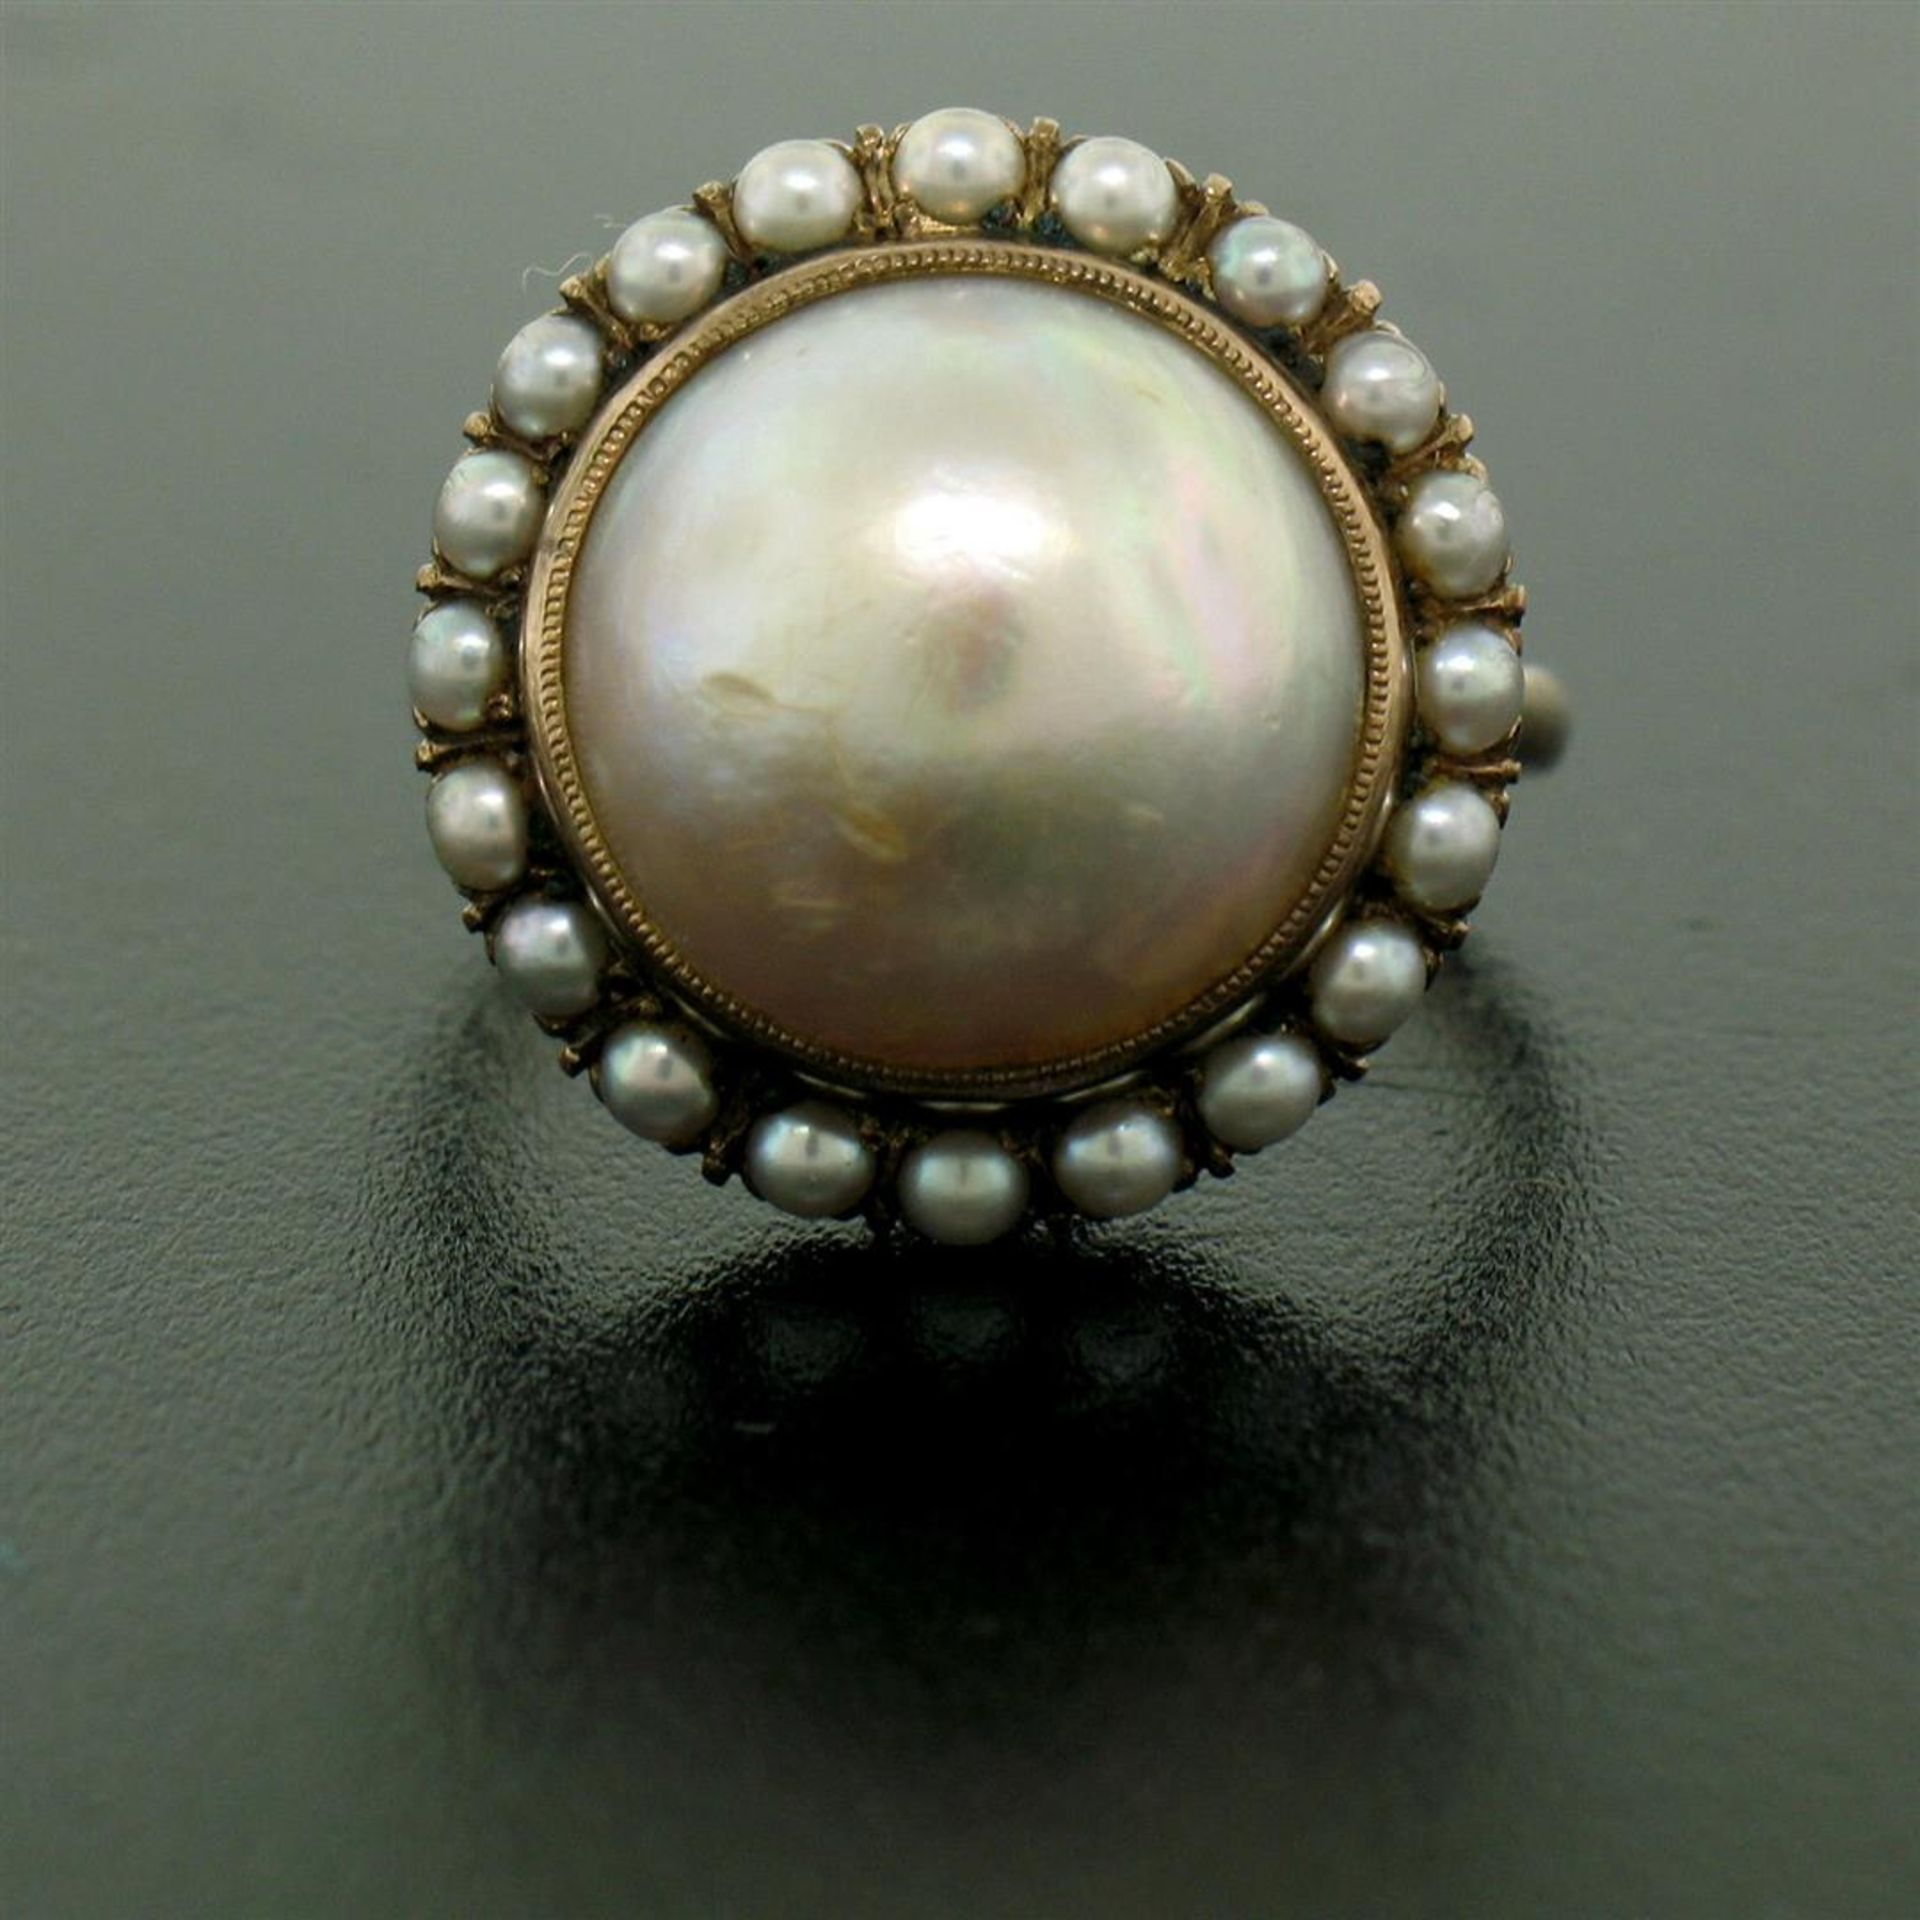 Antique Victorian 10K Rose Gold Bezel Mabe Prong Seed Pearl Ring & Earrings Set - Image 2 of 9